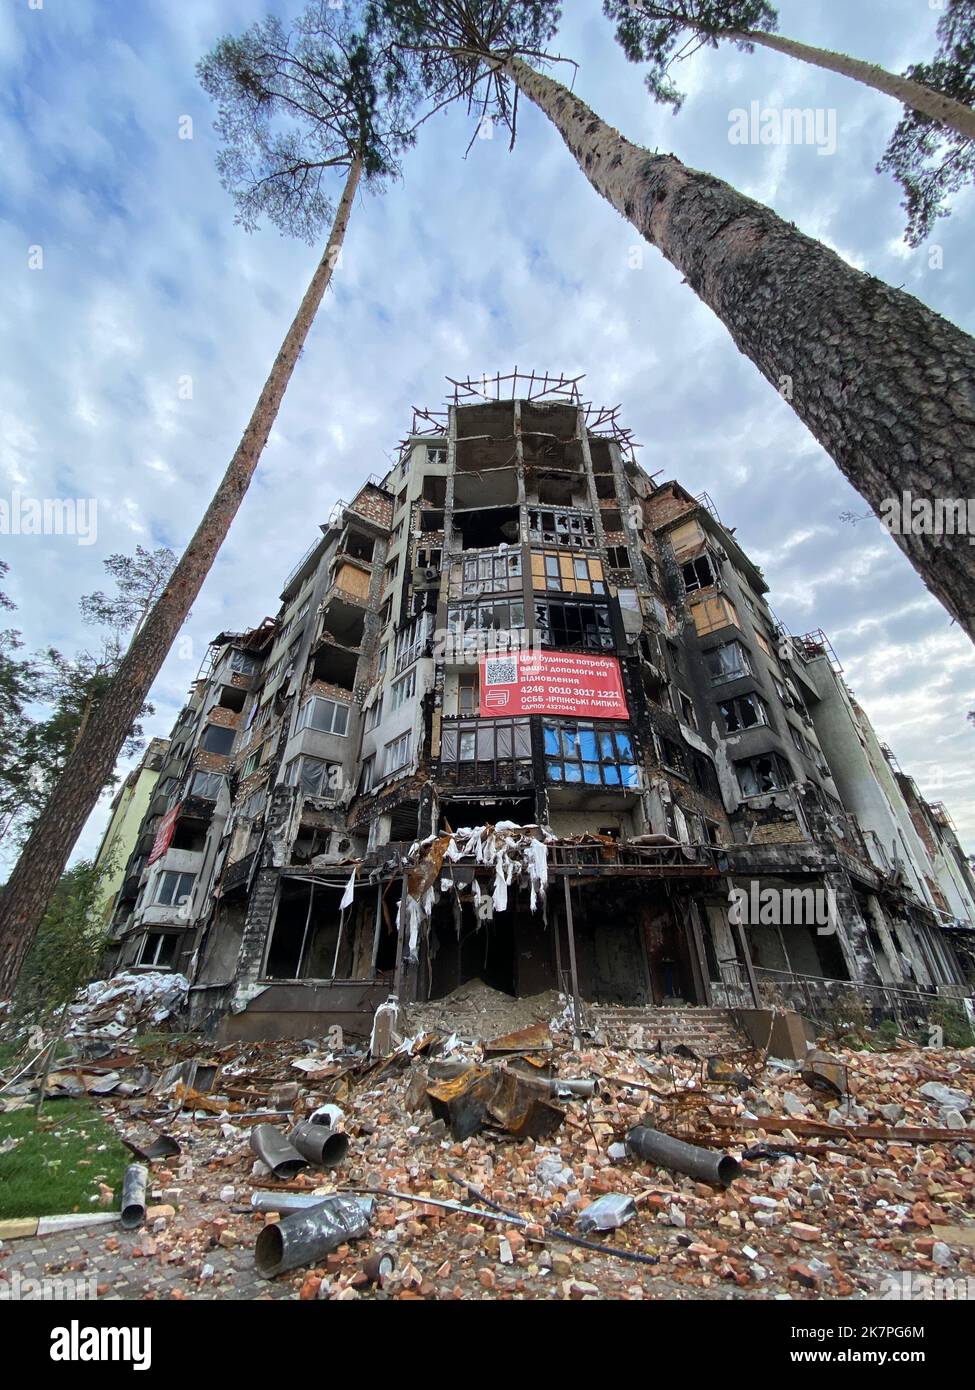 Bucha, Ukraine, 2022:Destroyed and damaged residential buildings in Butcha after Russia's invasion of Ukraine Stock Photo